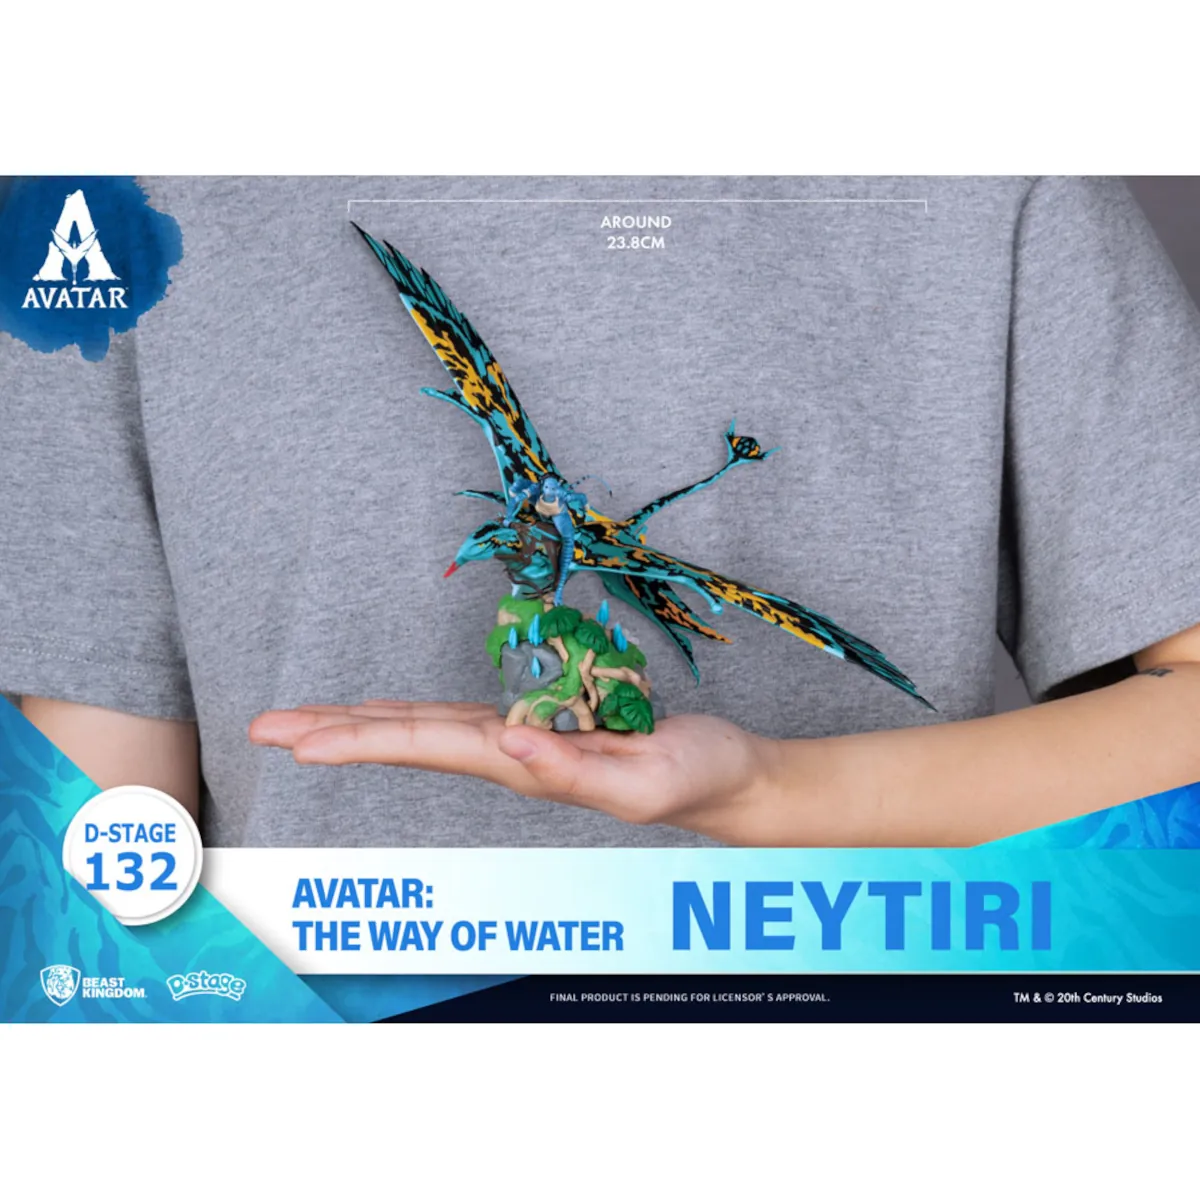 DS-132 Avatar The Way of Water D-Stage 12cm Neytiri PVC Diorama 7